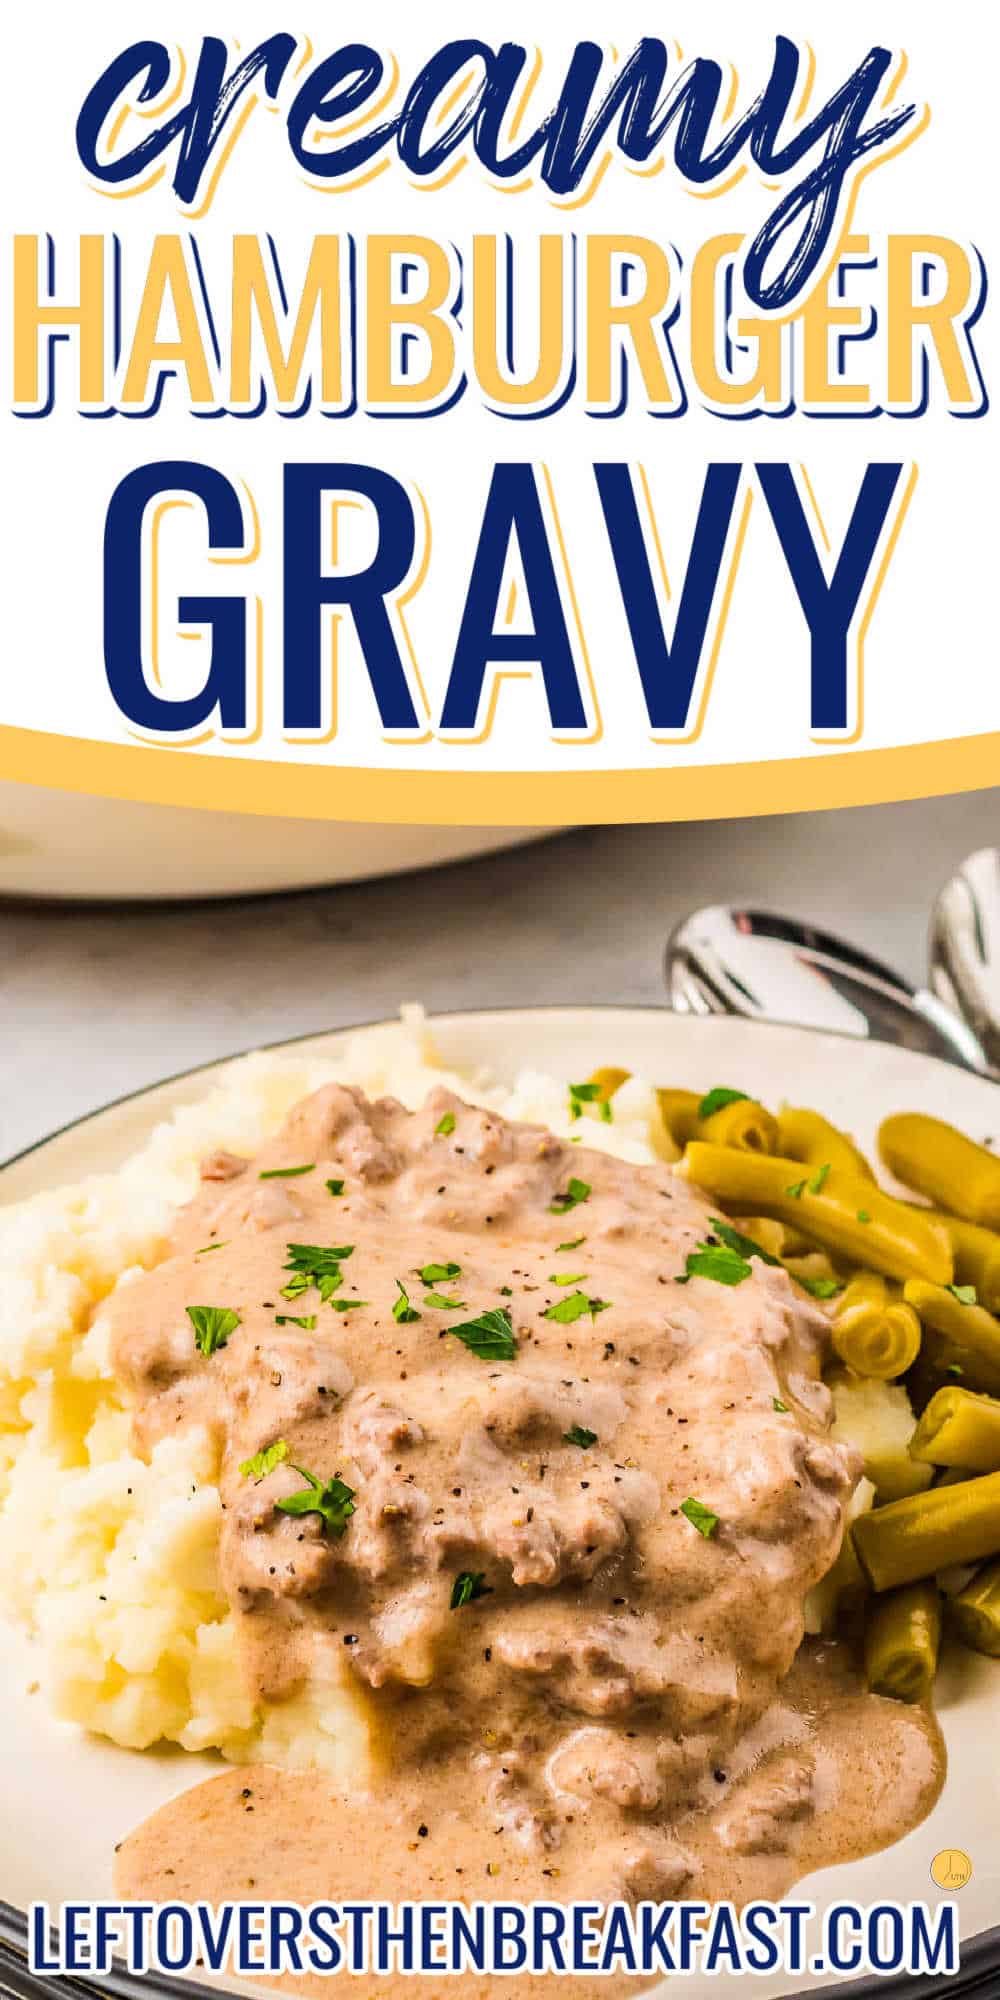 Close up of a white plate with a black rim filled with mashed potatoes topped with sausage gravy with a side of green beans with a text box on top saying "Creamy Hamburger Gravy".